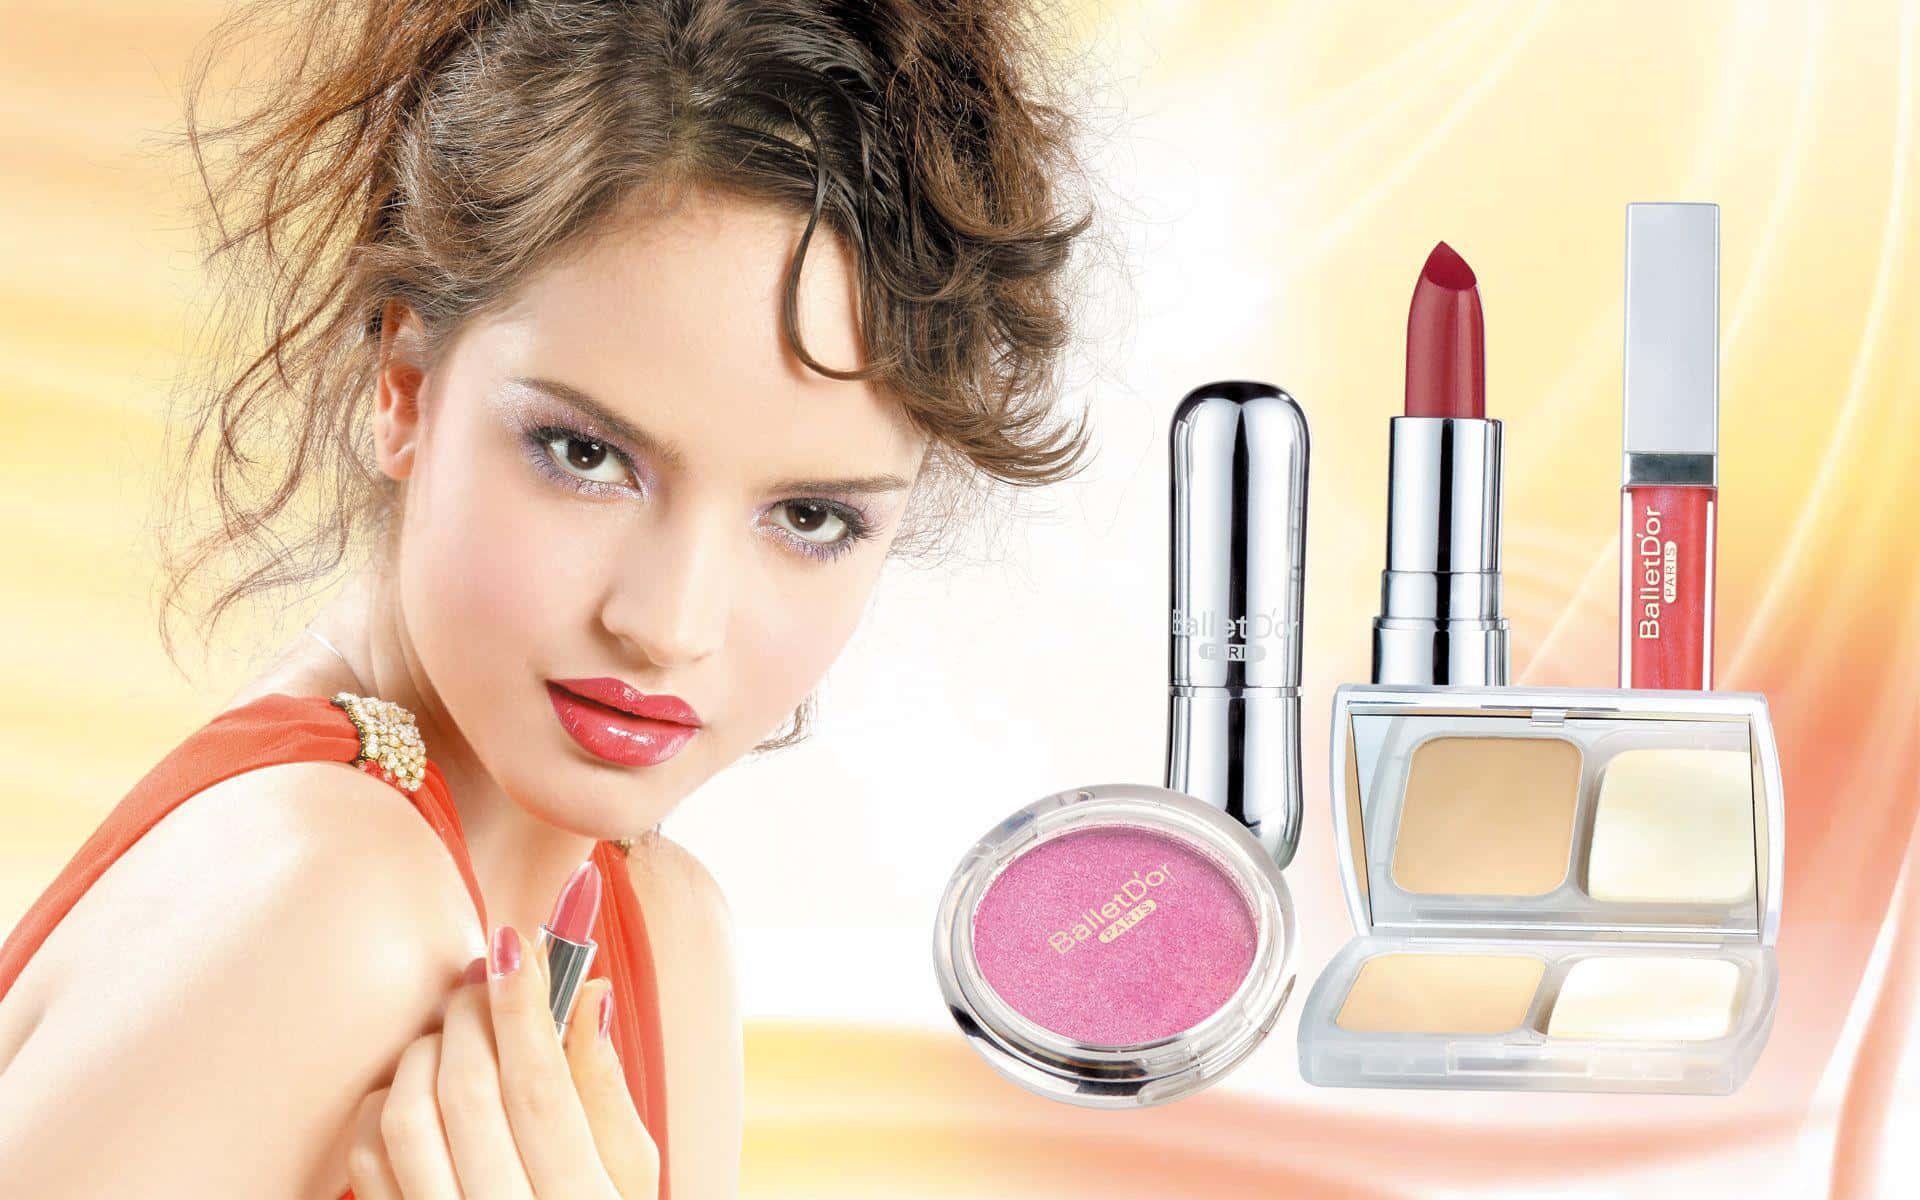 Choose from an extensive selection of cosmetics and beauty products.